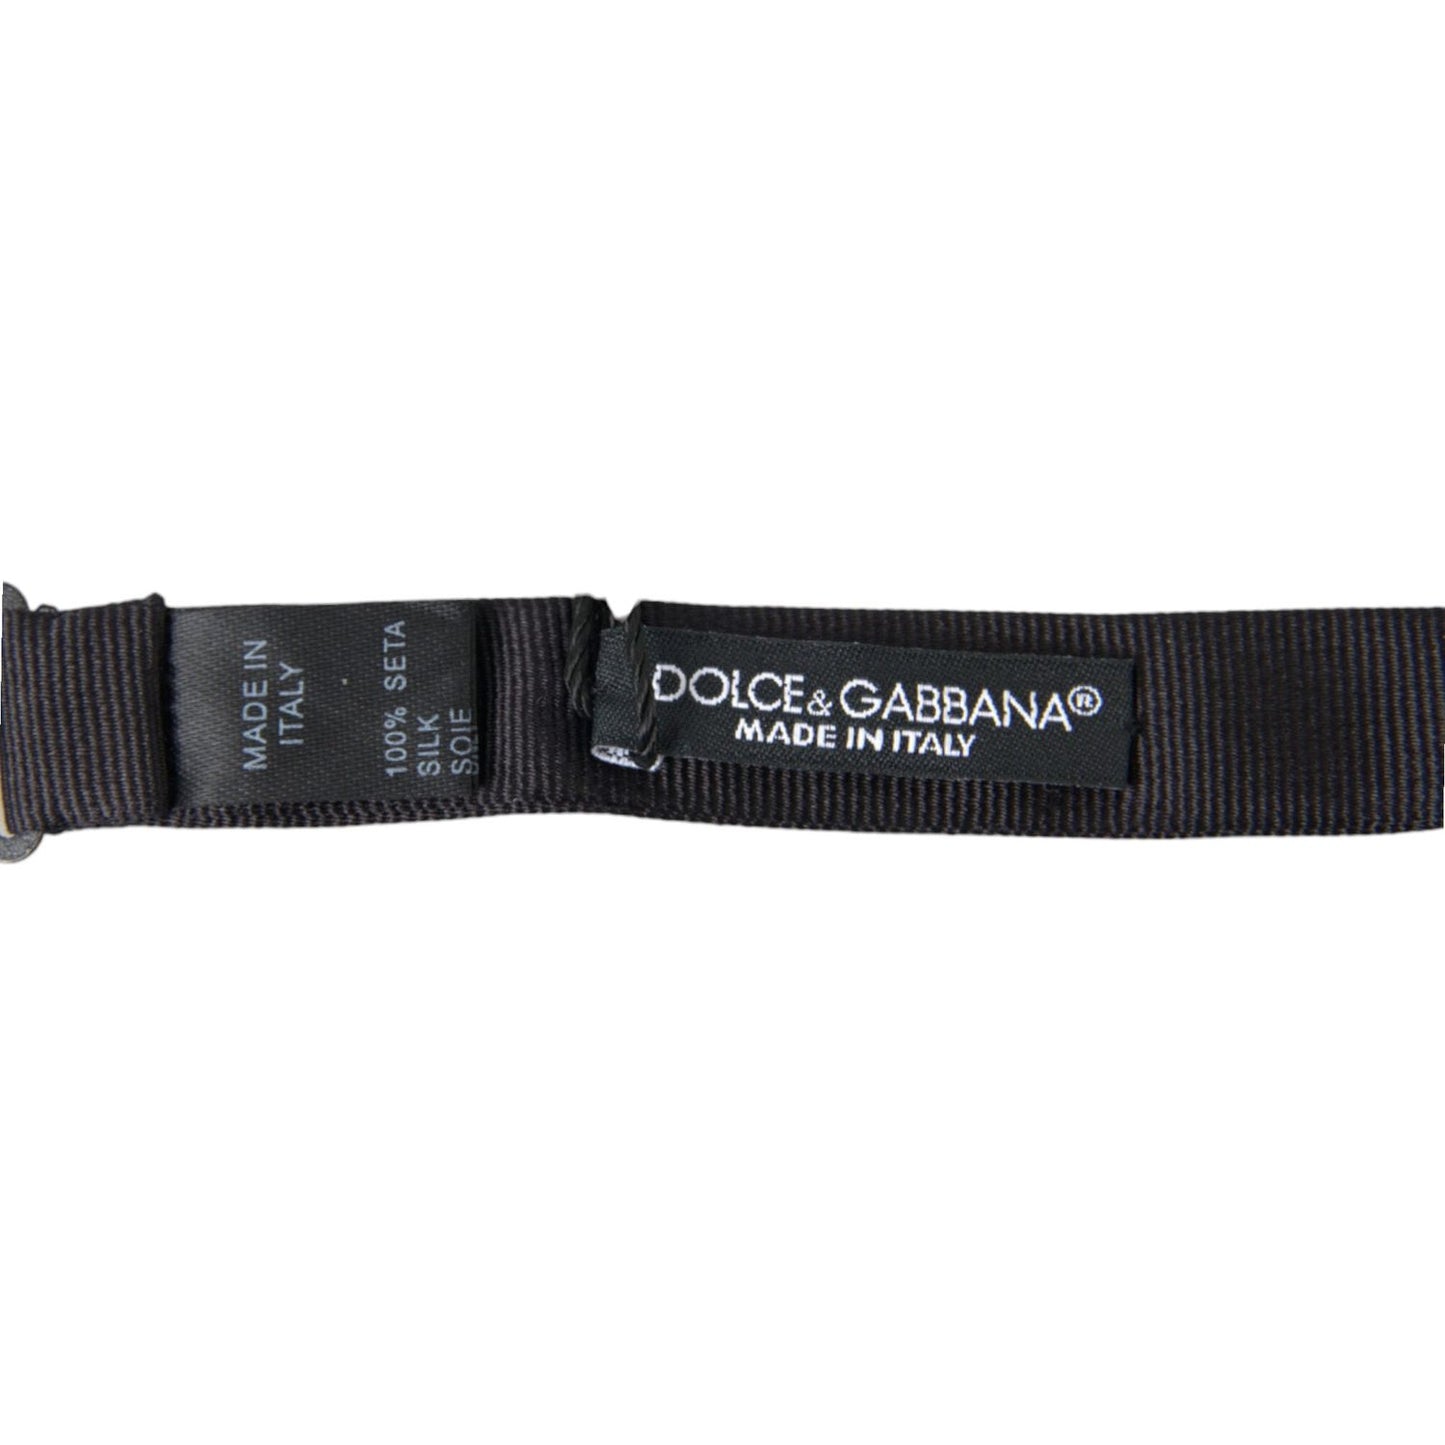 Elegant Silk Black Bow Tie for Sophisticated Style Dolce & Gabbana